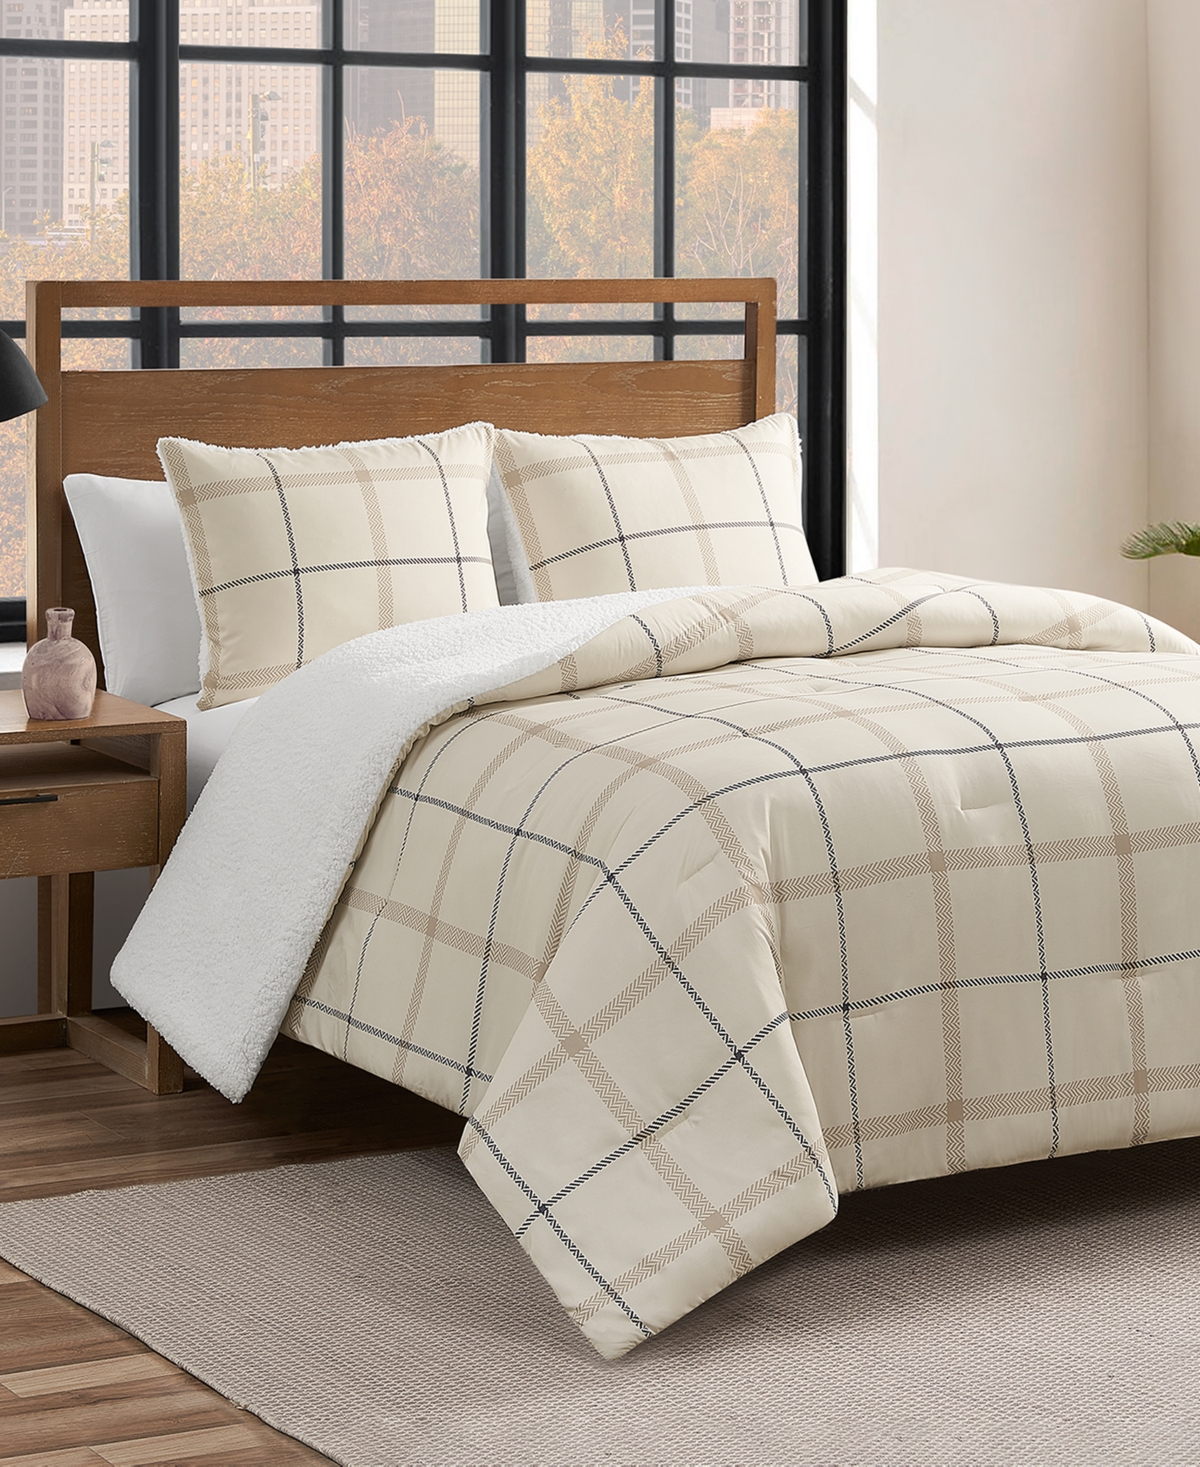 Lucky Brand Sherpa Reversible Microfiber 3-piece Comforter Set, Full/queen In Plaid